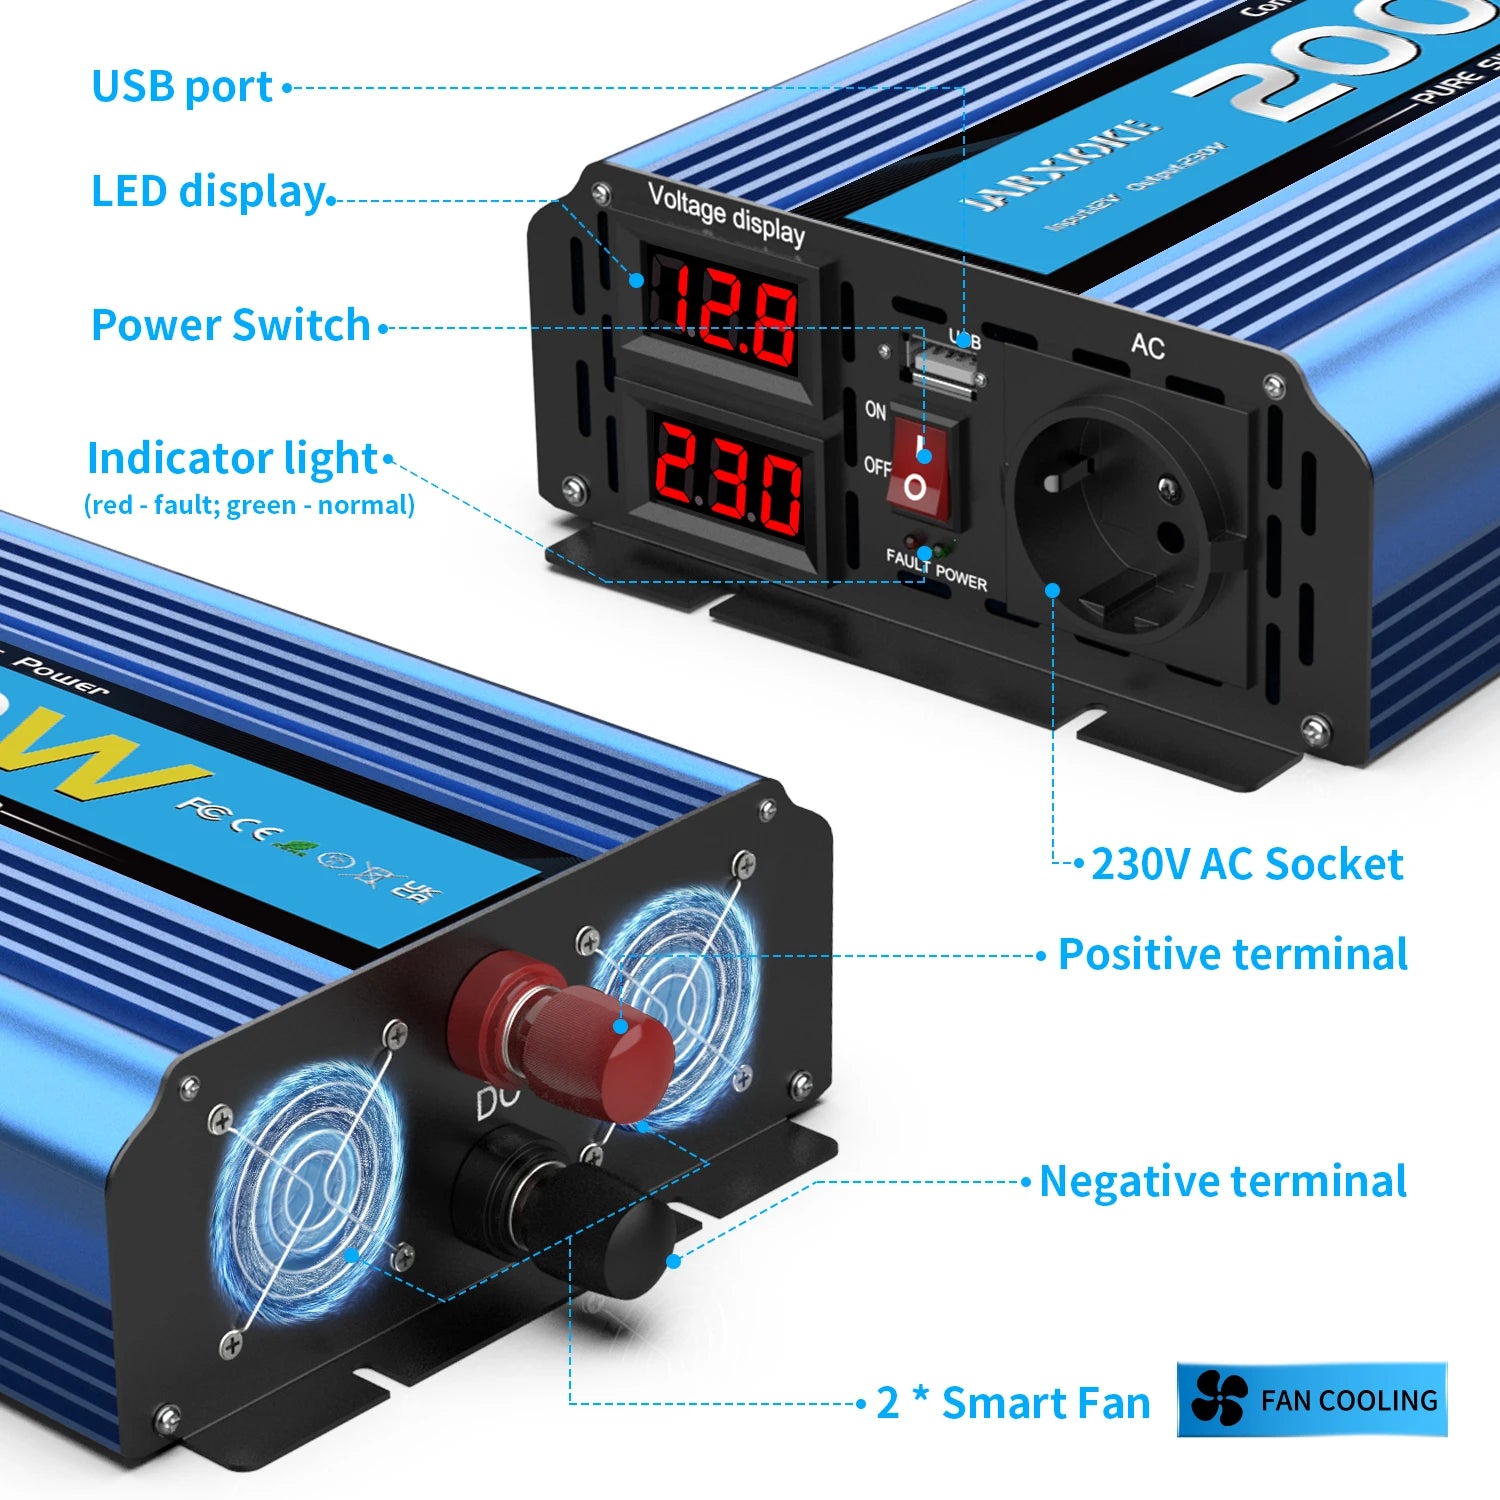 Solar inverter with pure sine wave output, voltage range, and various features like USB port and LED display.